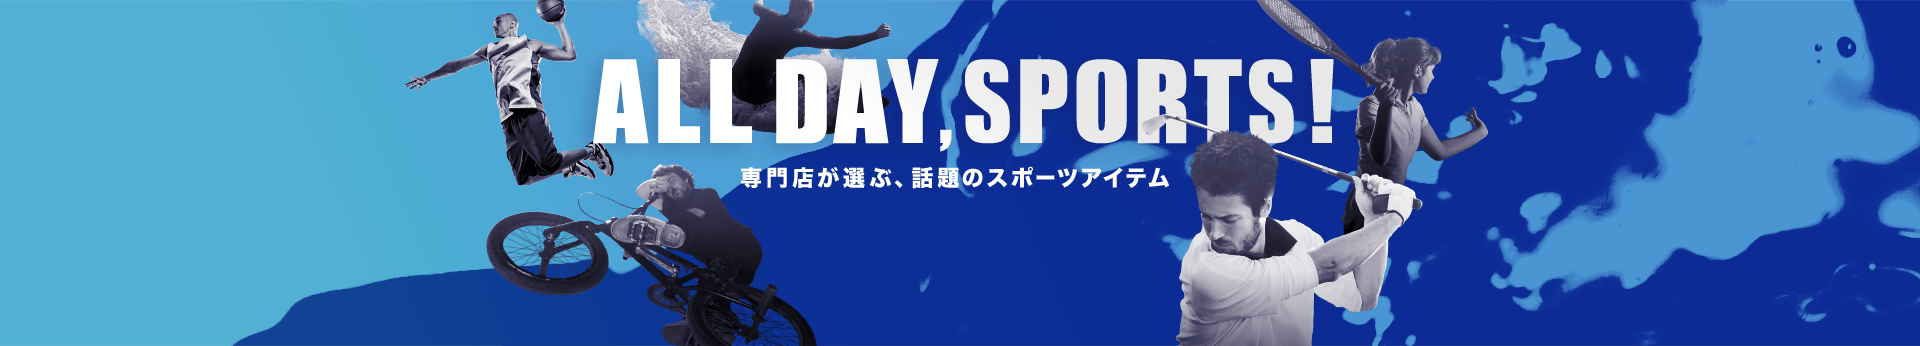 ALL DAY SPORTS｜専門店が選ぶ、話題のスポーツアイテム